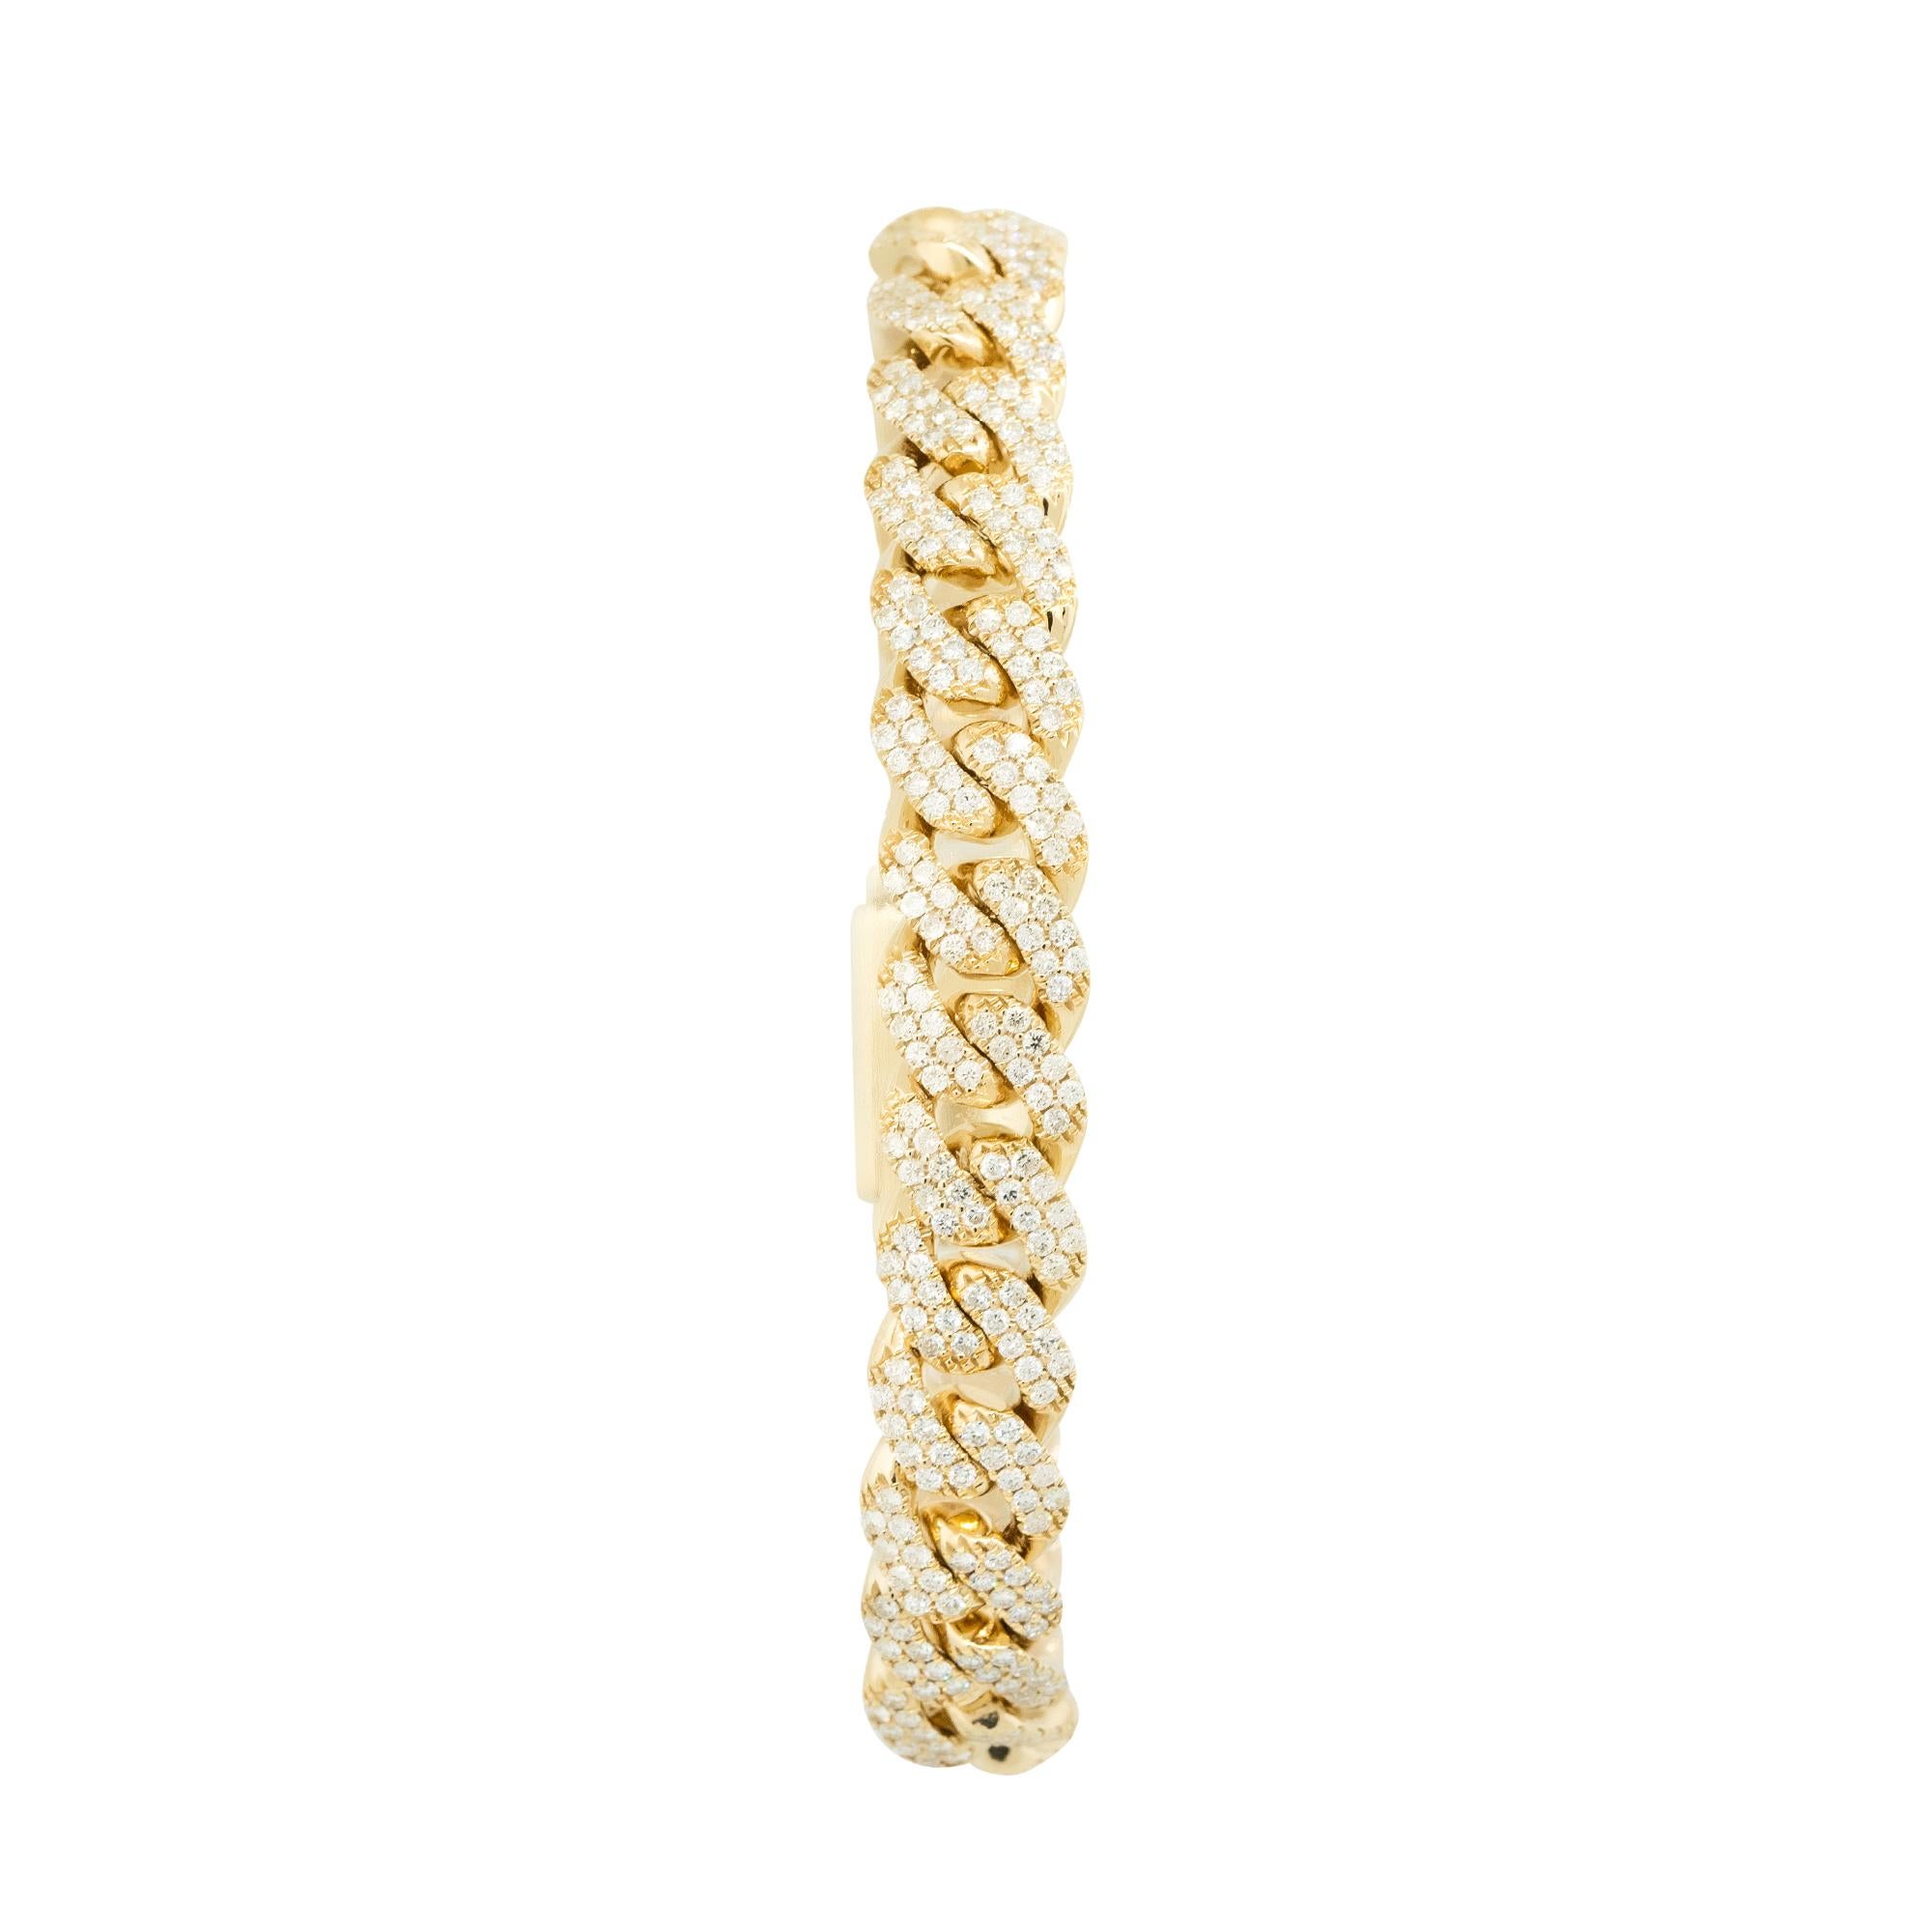 Material: 14K Yellow Gold
Diamond Details: Approx. 5.0ctw of Round Cut Diamonds. This bracelet is set with pave diamonds
Clasp: Tongue In Box Clasp
Total Weight: 37.4g (24dwts)
Item details: 7